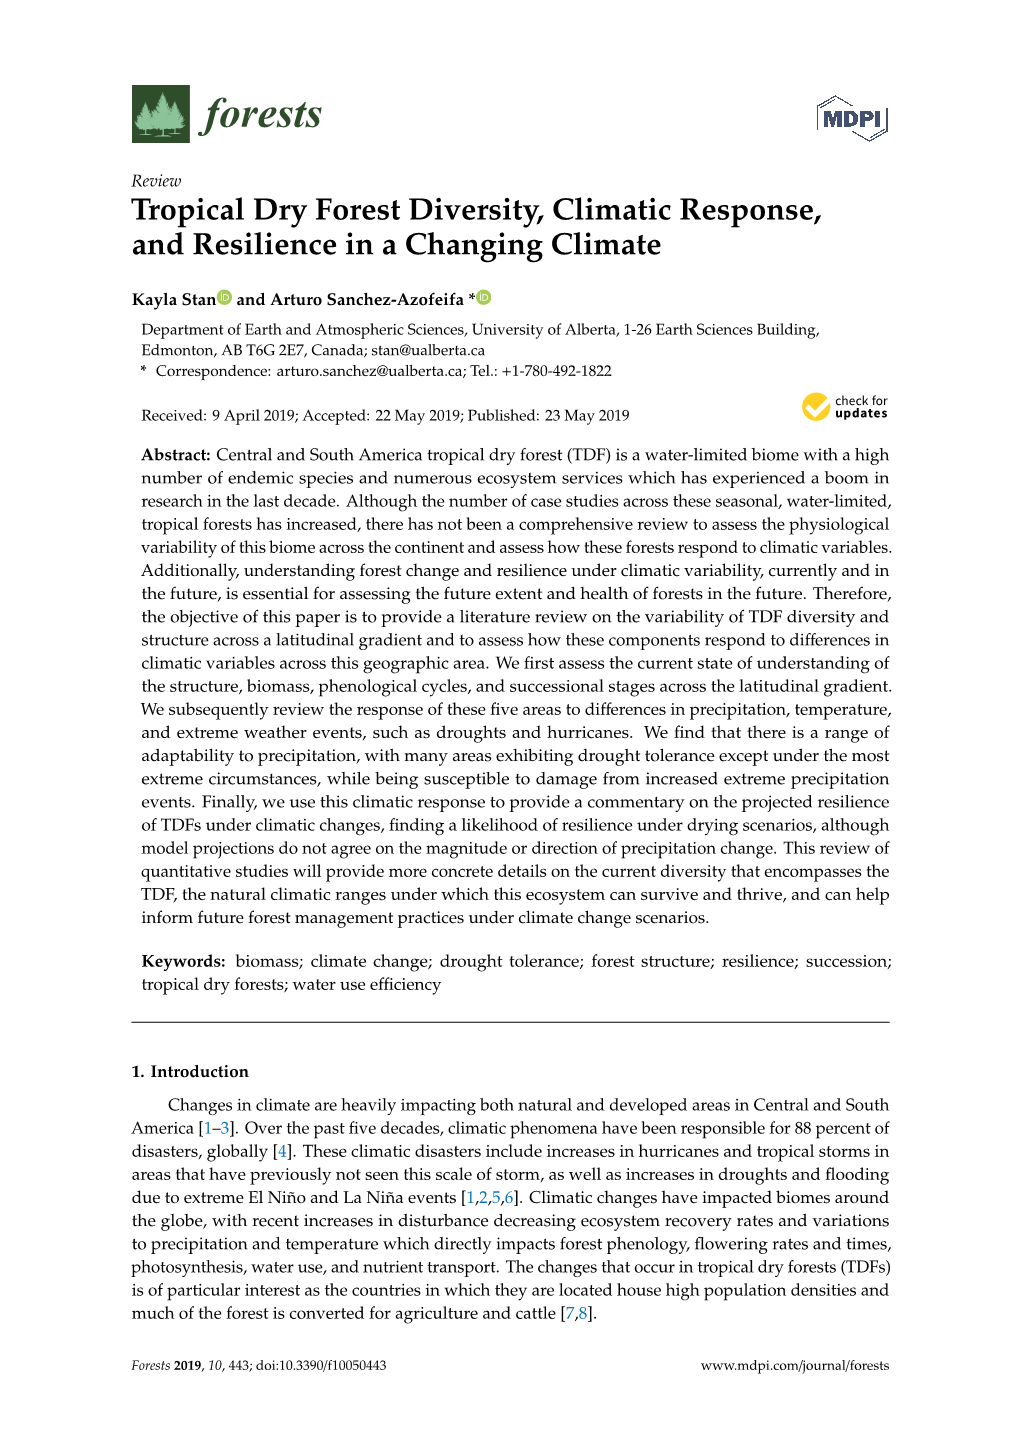 Tropical Dry Forest Diversity, Climatic Response, and Resilience in a Changing Climate